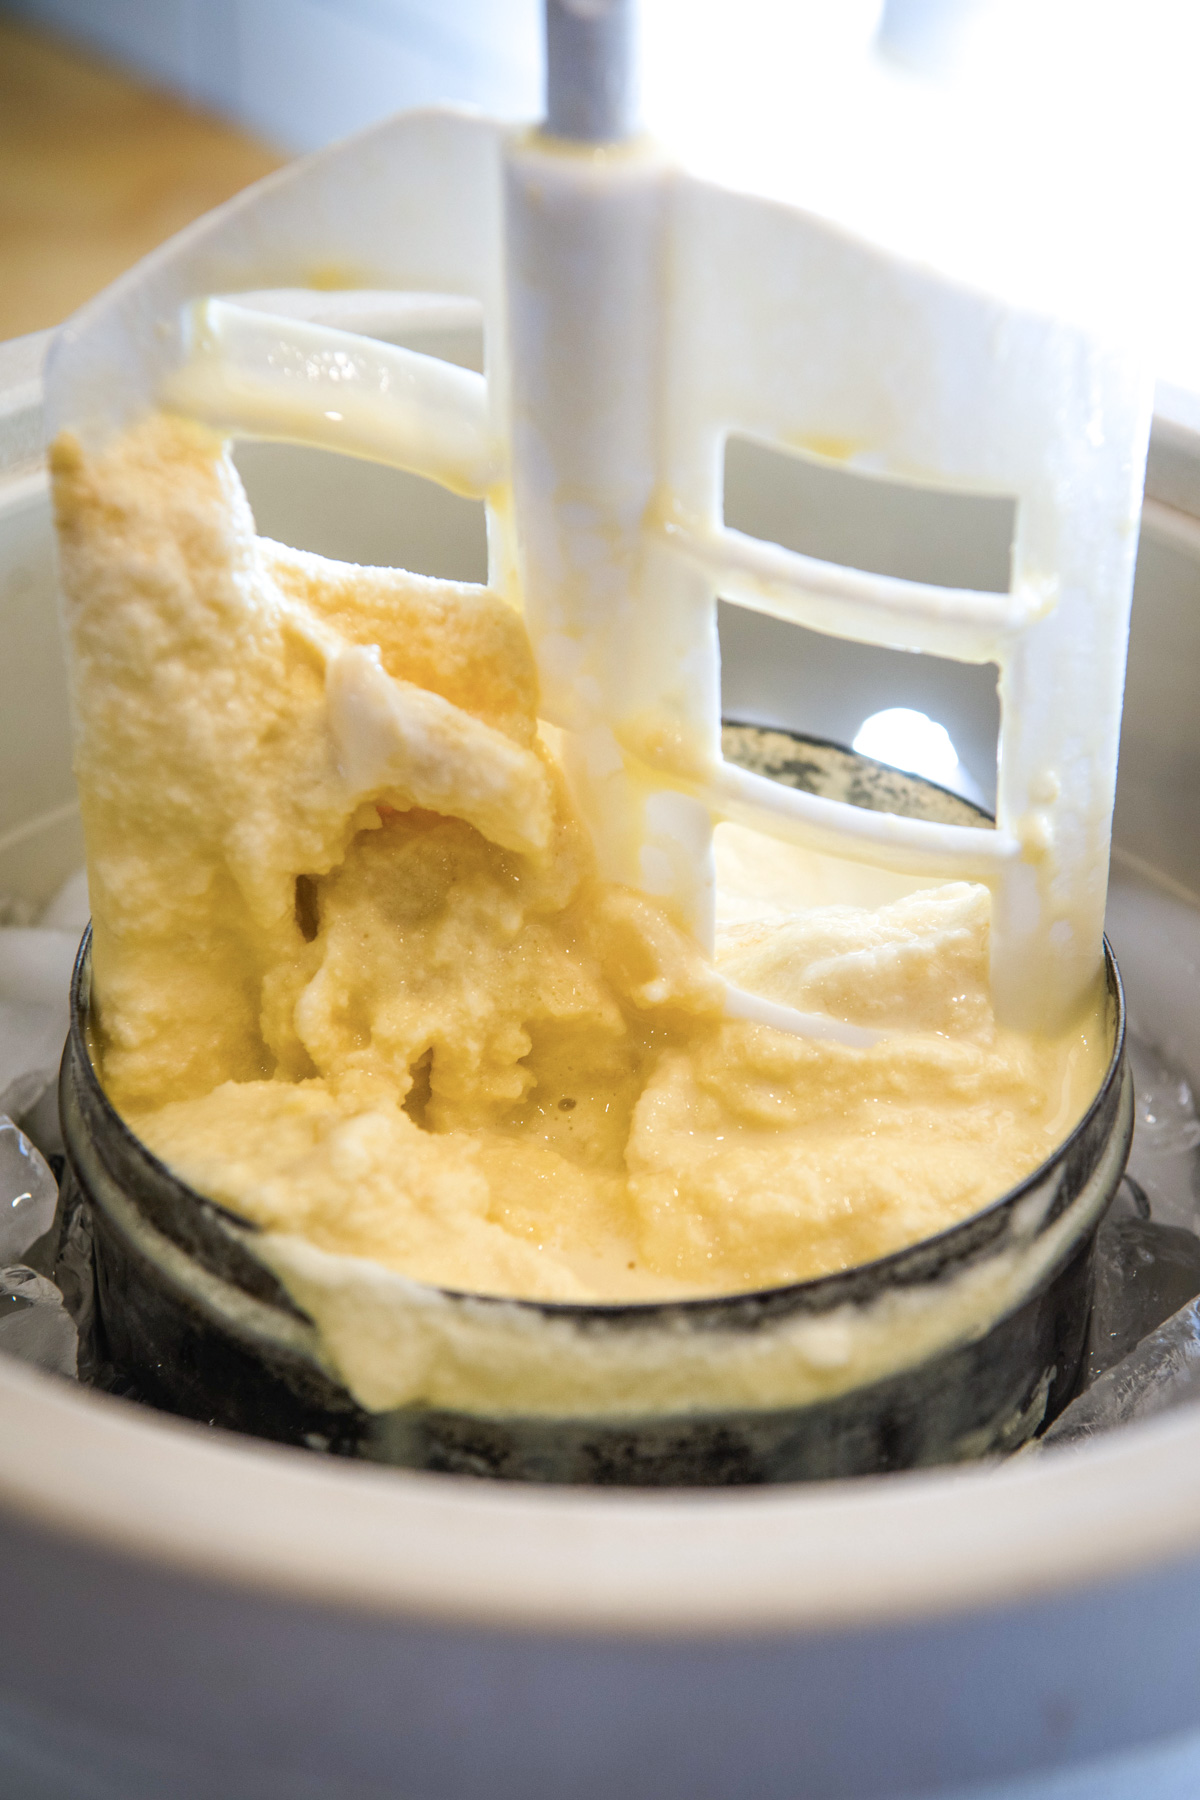 old-fashioned ice cream maker with churn paddle covered in homemade banana ice cream